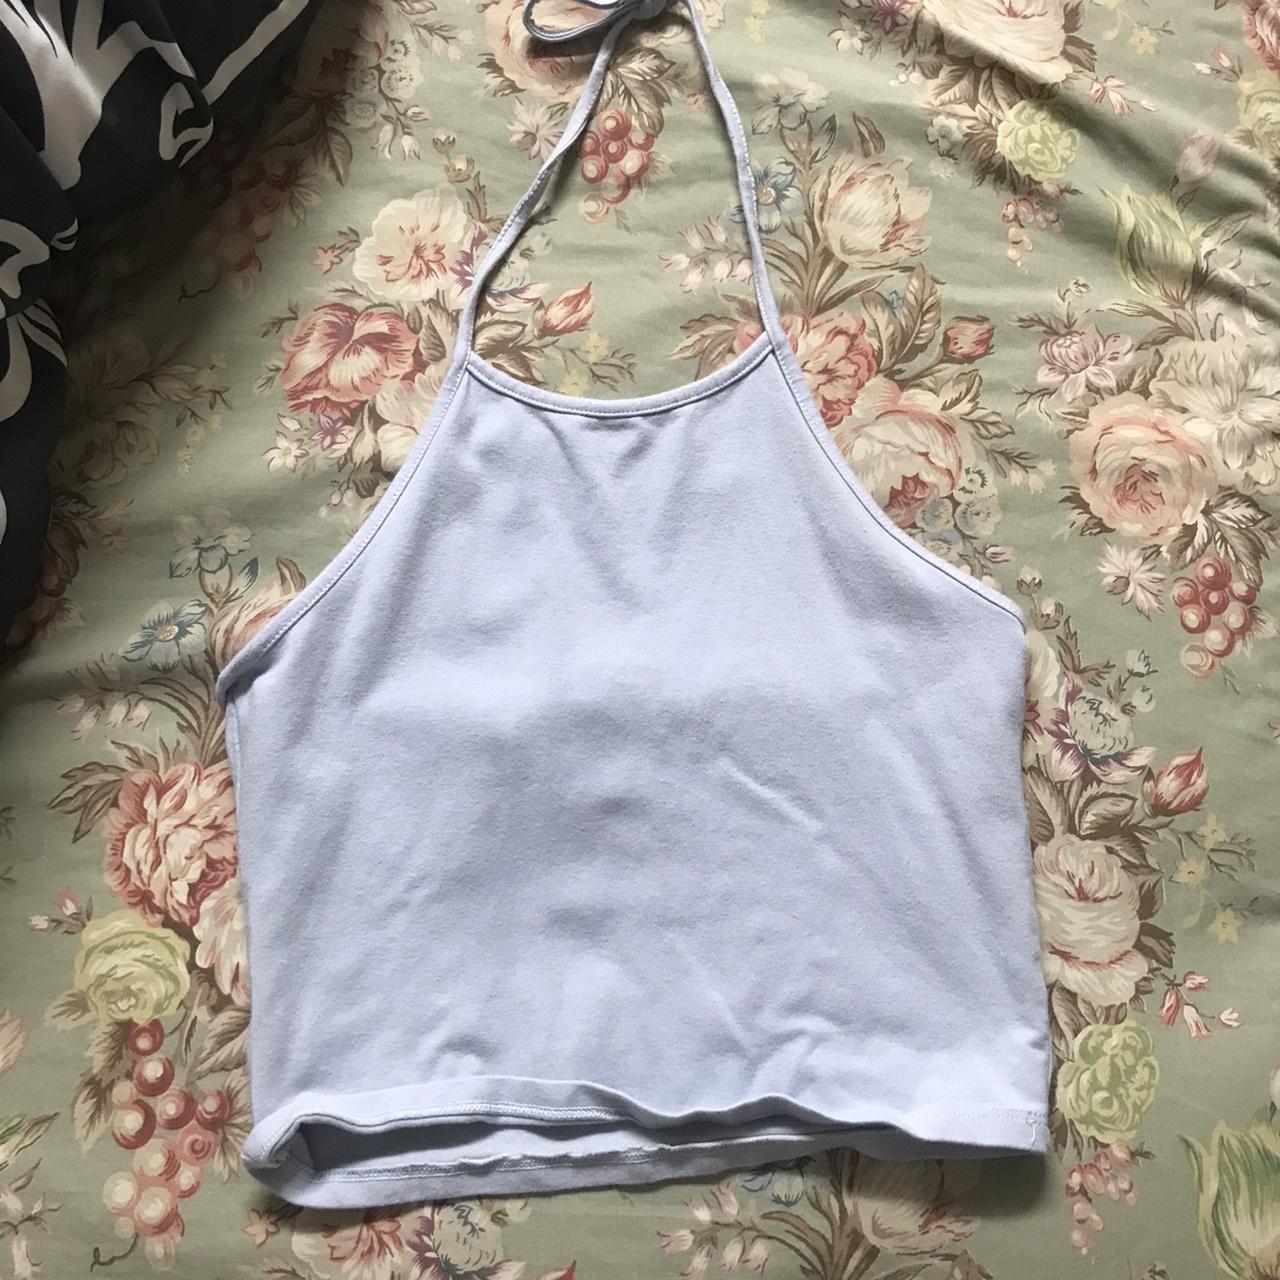 Brandy melville halter top, Worn once, One size but